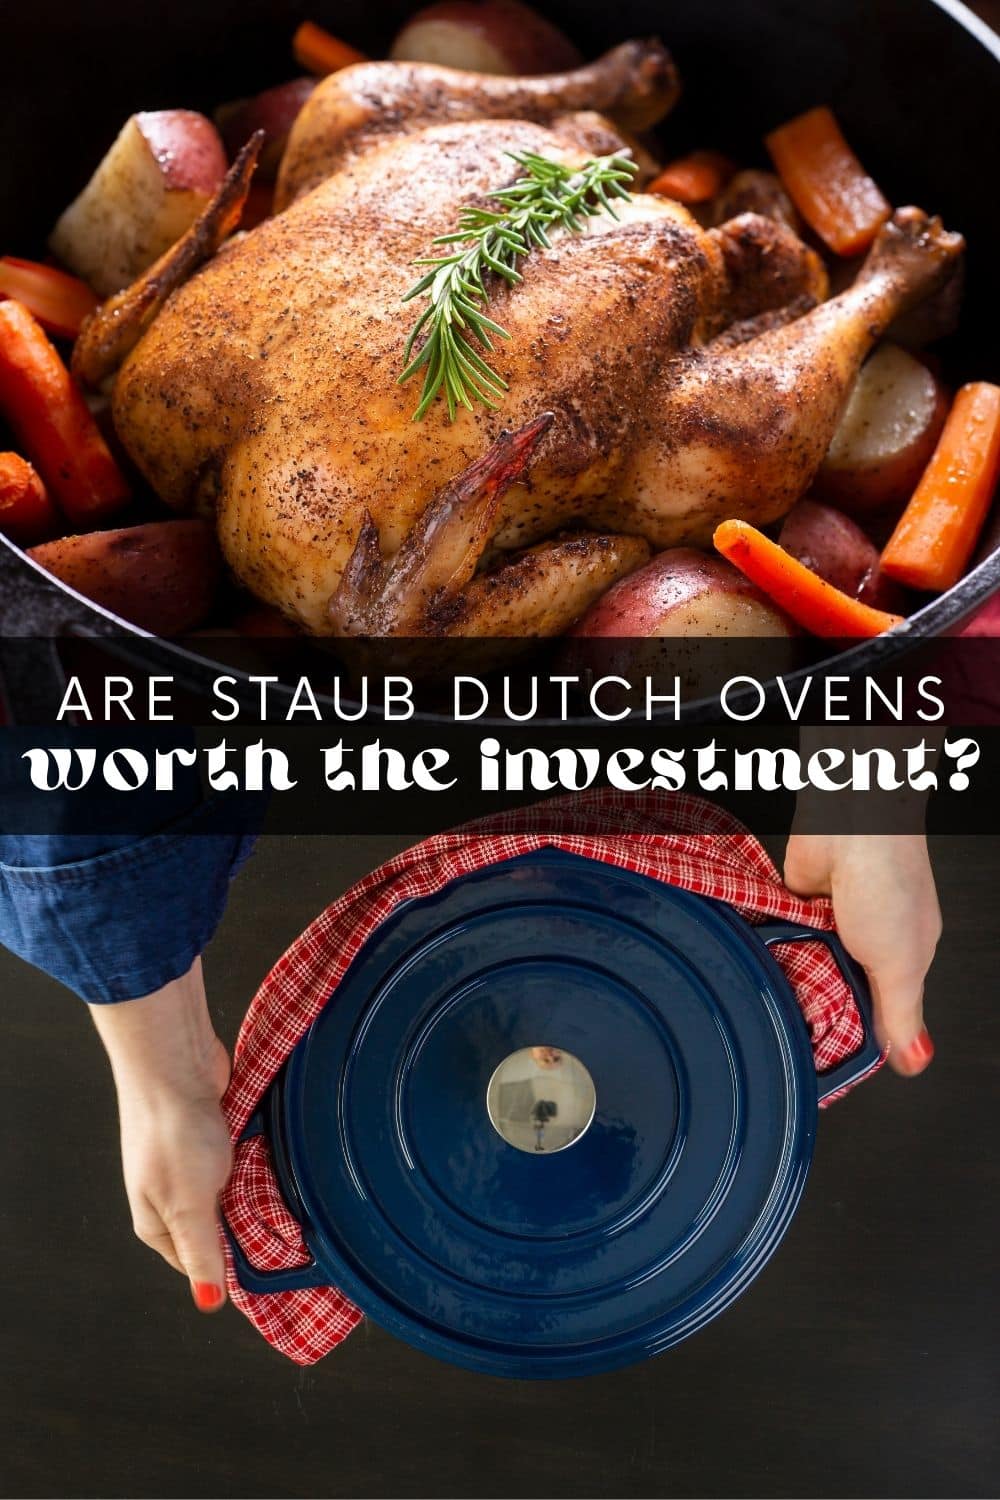 Staub Dutch ovens are the best choice for anyone looking to upgrade their kitchenware. They're durable and beautifully designed, and the limited lifetime warranty means you can trust their quality! If you haven’t invested in a cast iron Dutch oven before, Staub is the perfect brand to start with.